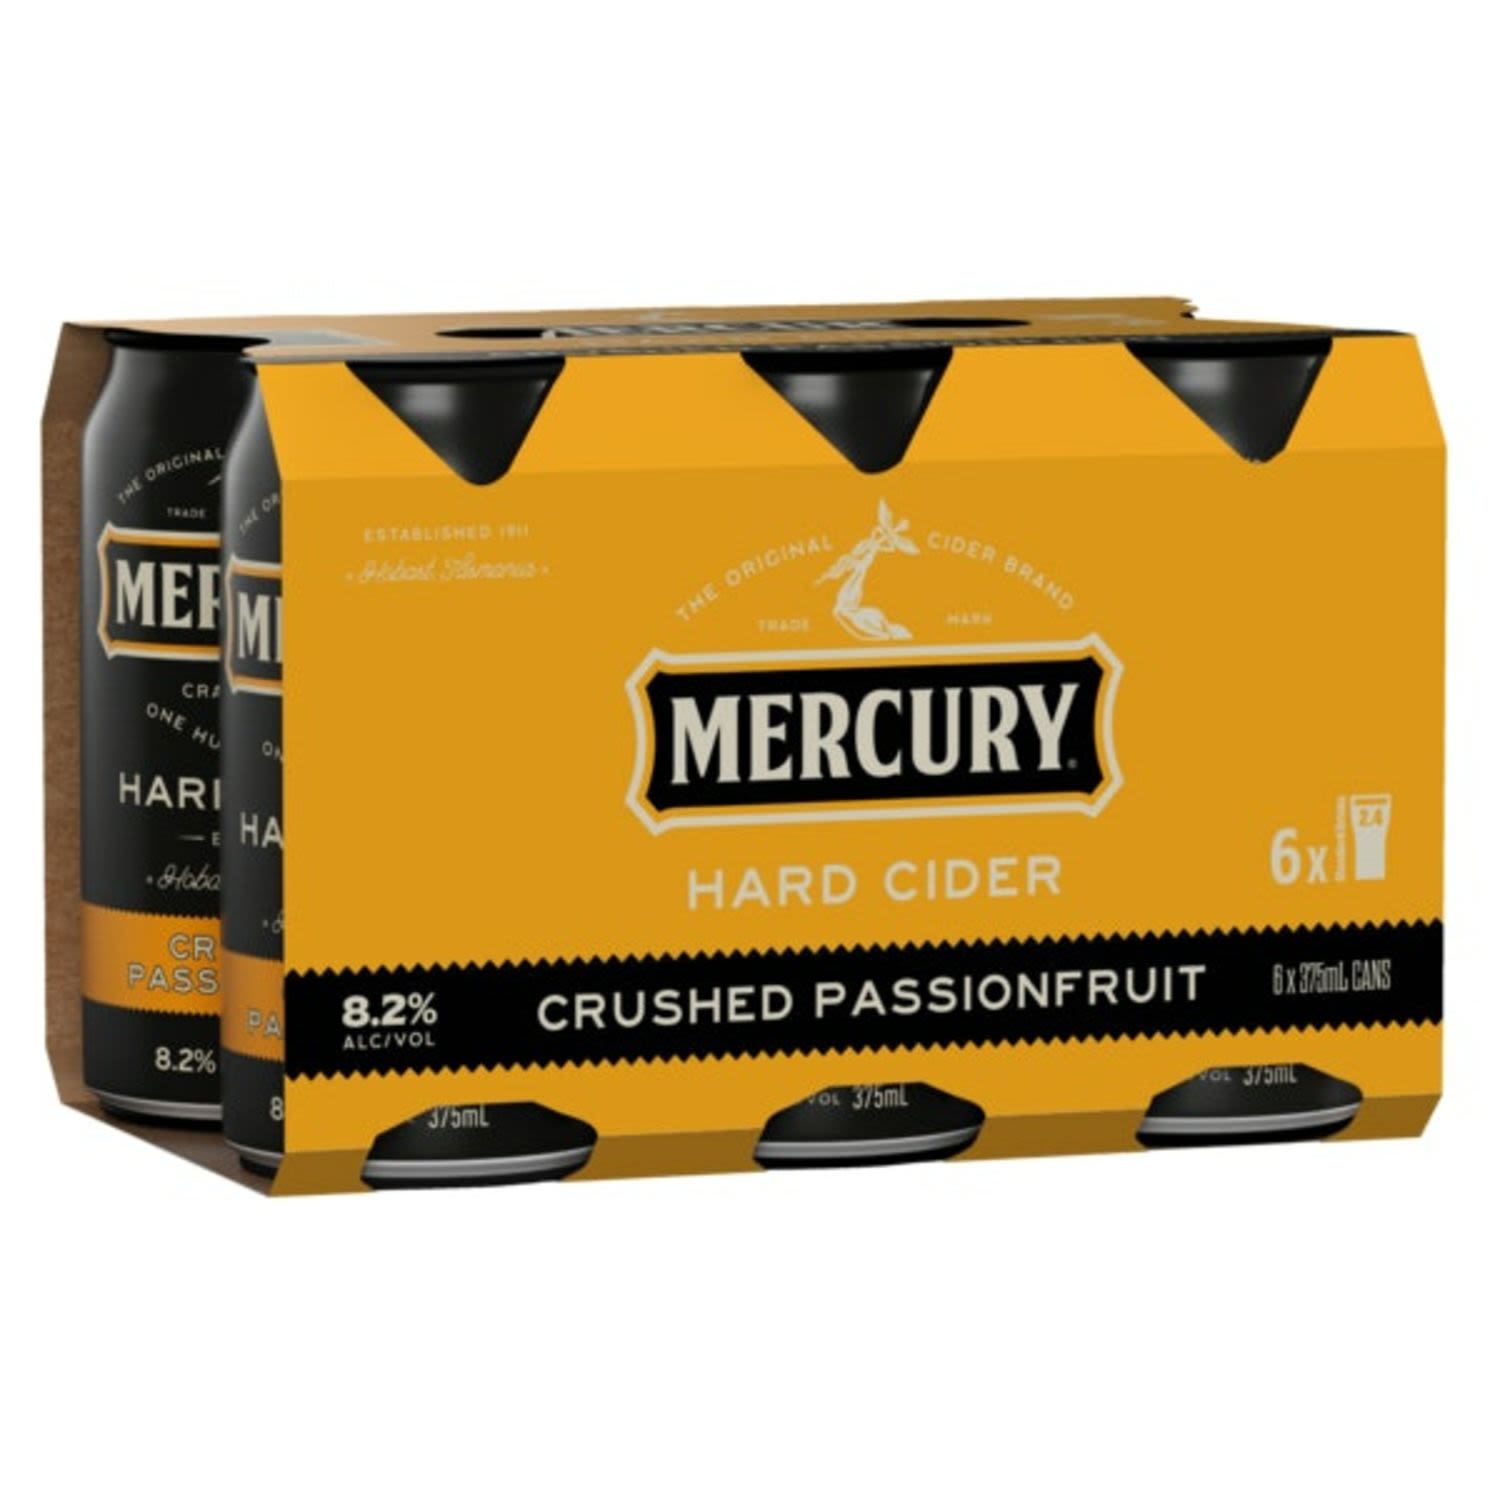 Mercury Hard Cider Crushed Passionfruit Can 375mL 6 Pack